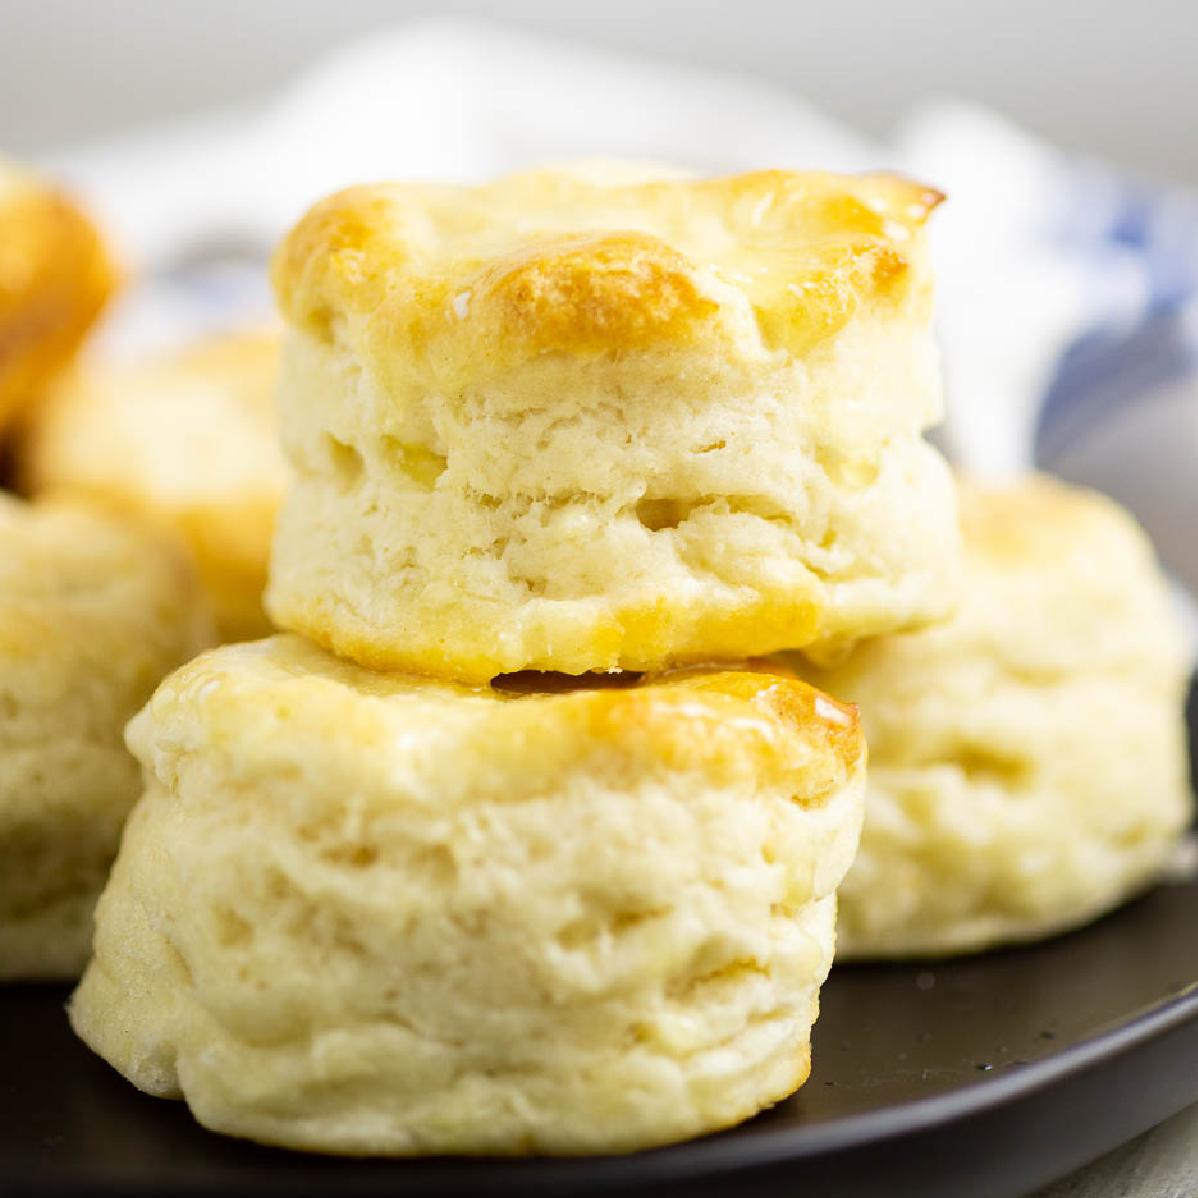  Light, fluffy, and buttery biscuits fresh out of the oven